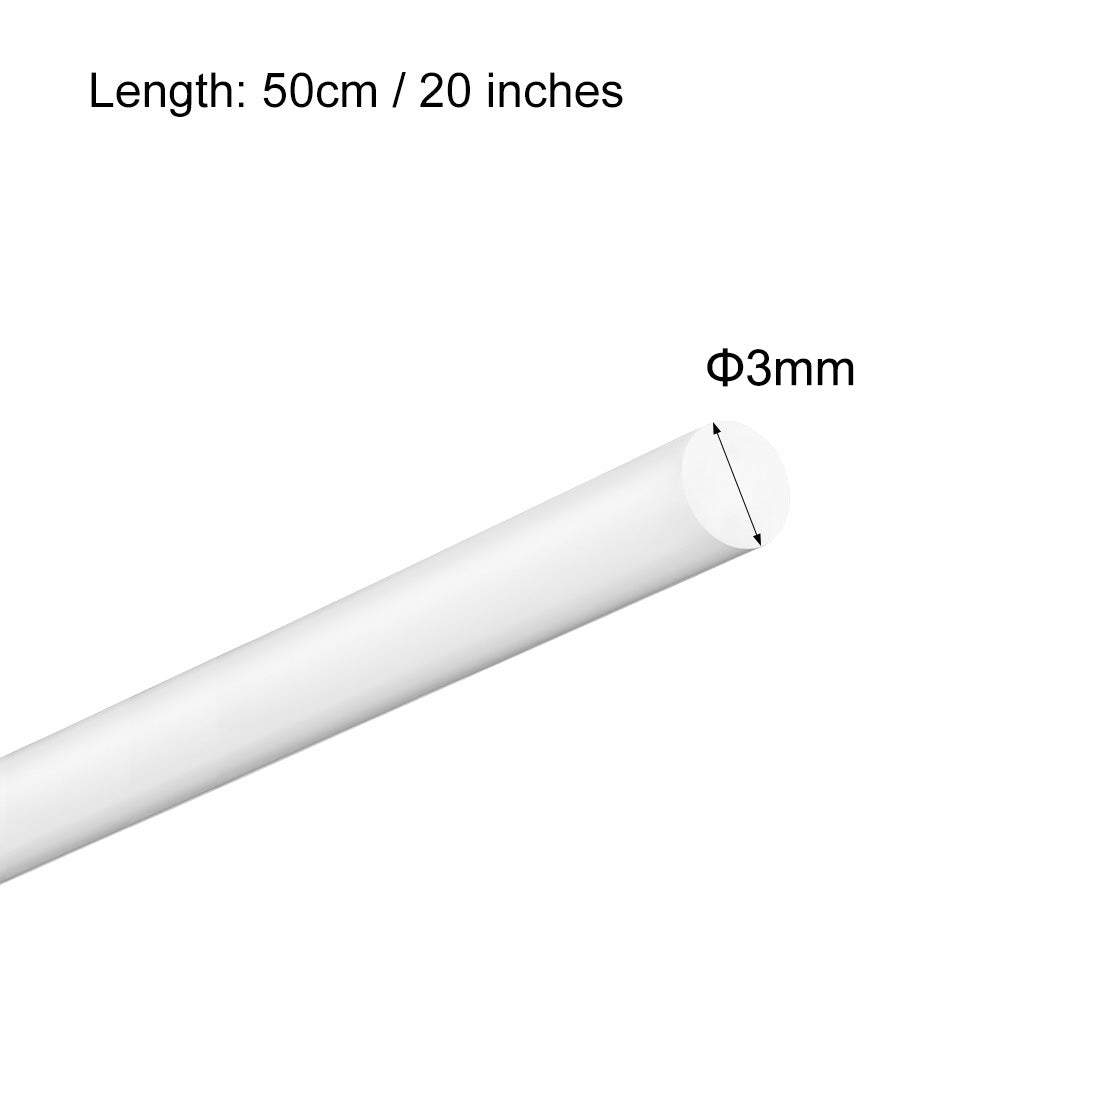 uxcell Uxcell Plastic Round Rod,3mm Dia 50cm White Engineering Plastic Round Bar 2pcs